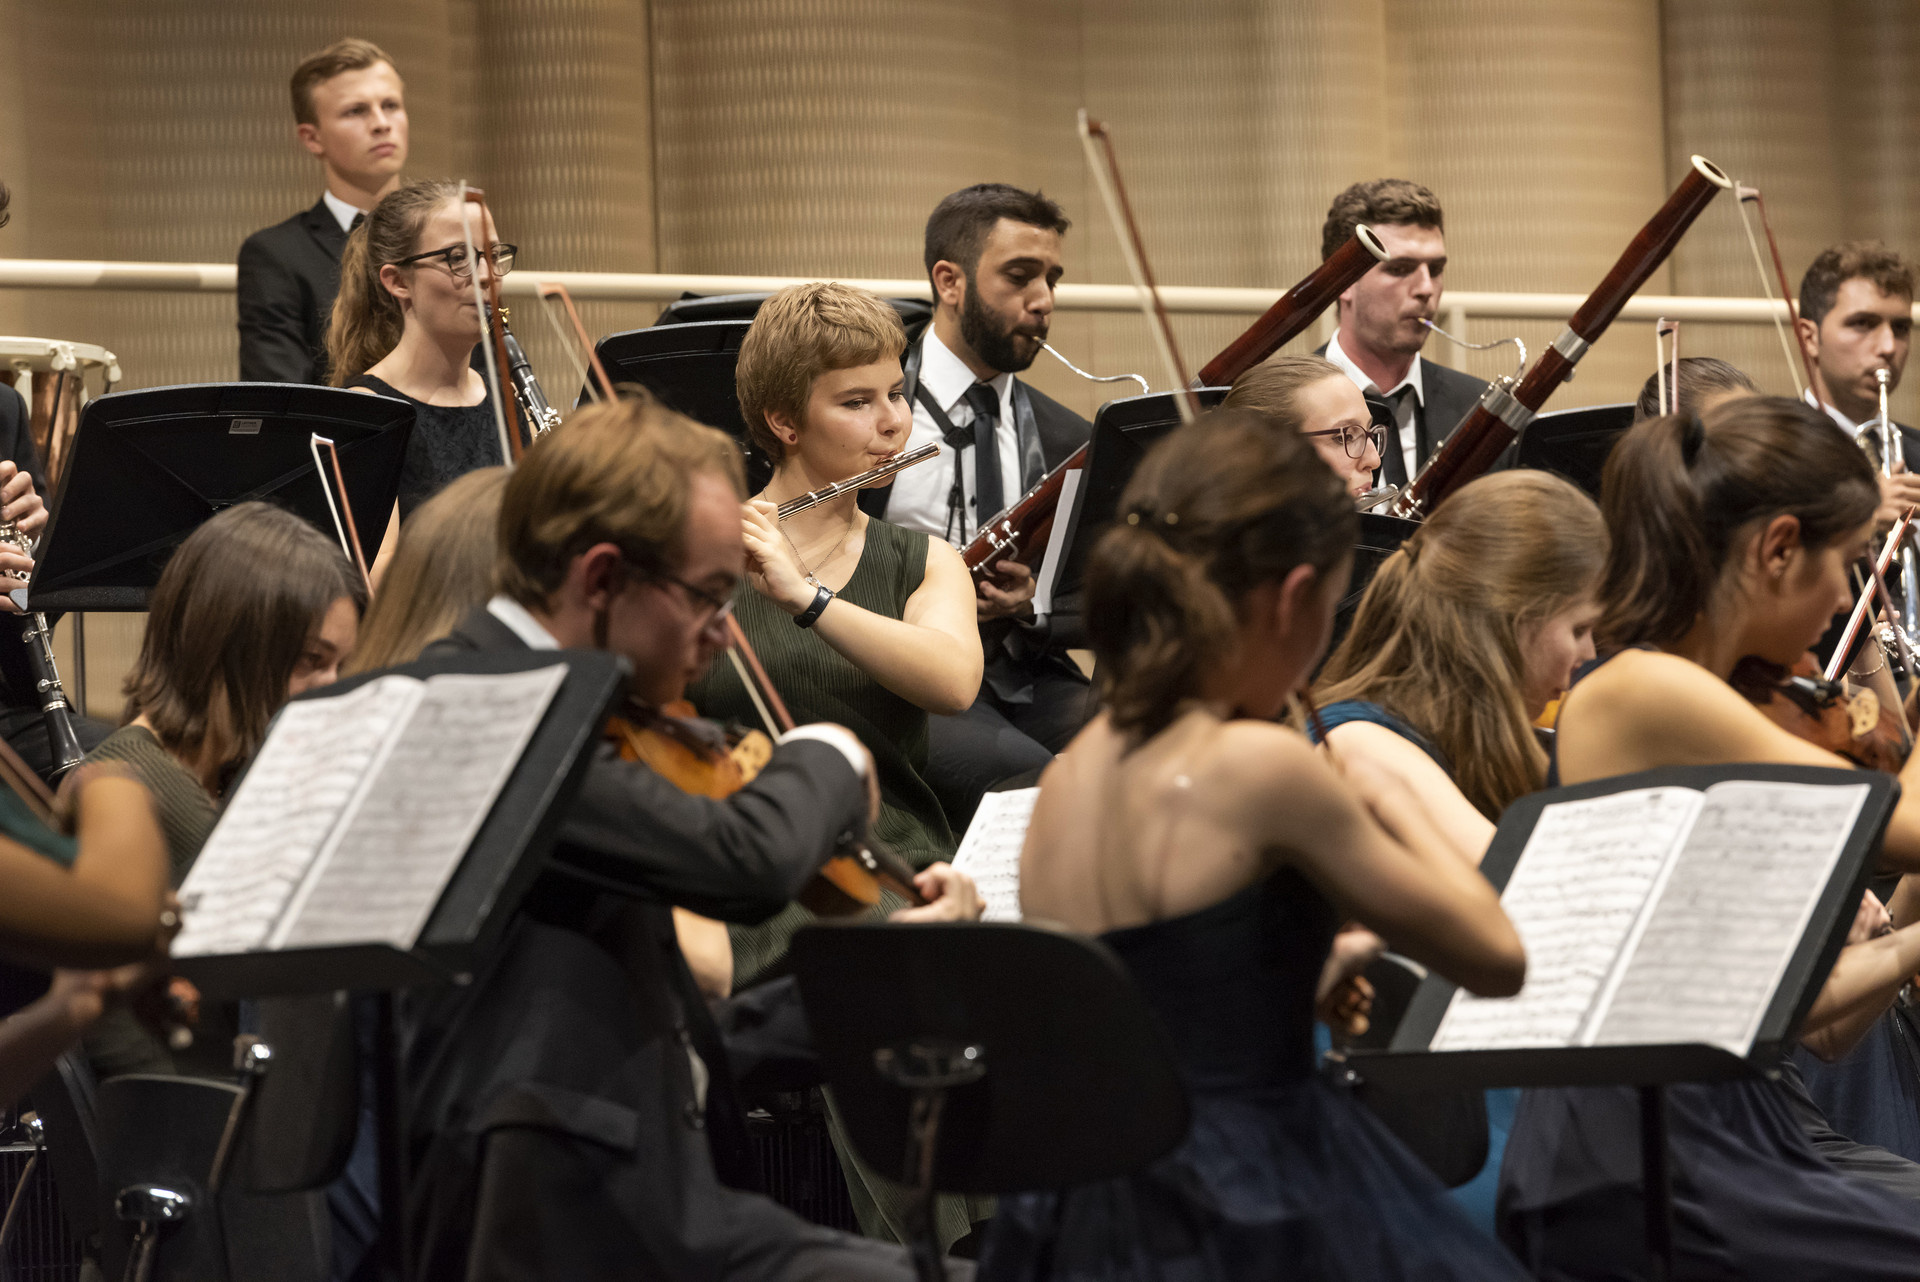 Orchestra: PreCollege Orchestra, Zurich University of the Arts, Playing orchestral solos. 1920x1290 HD Wallpaper.